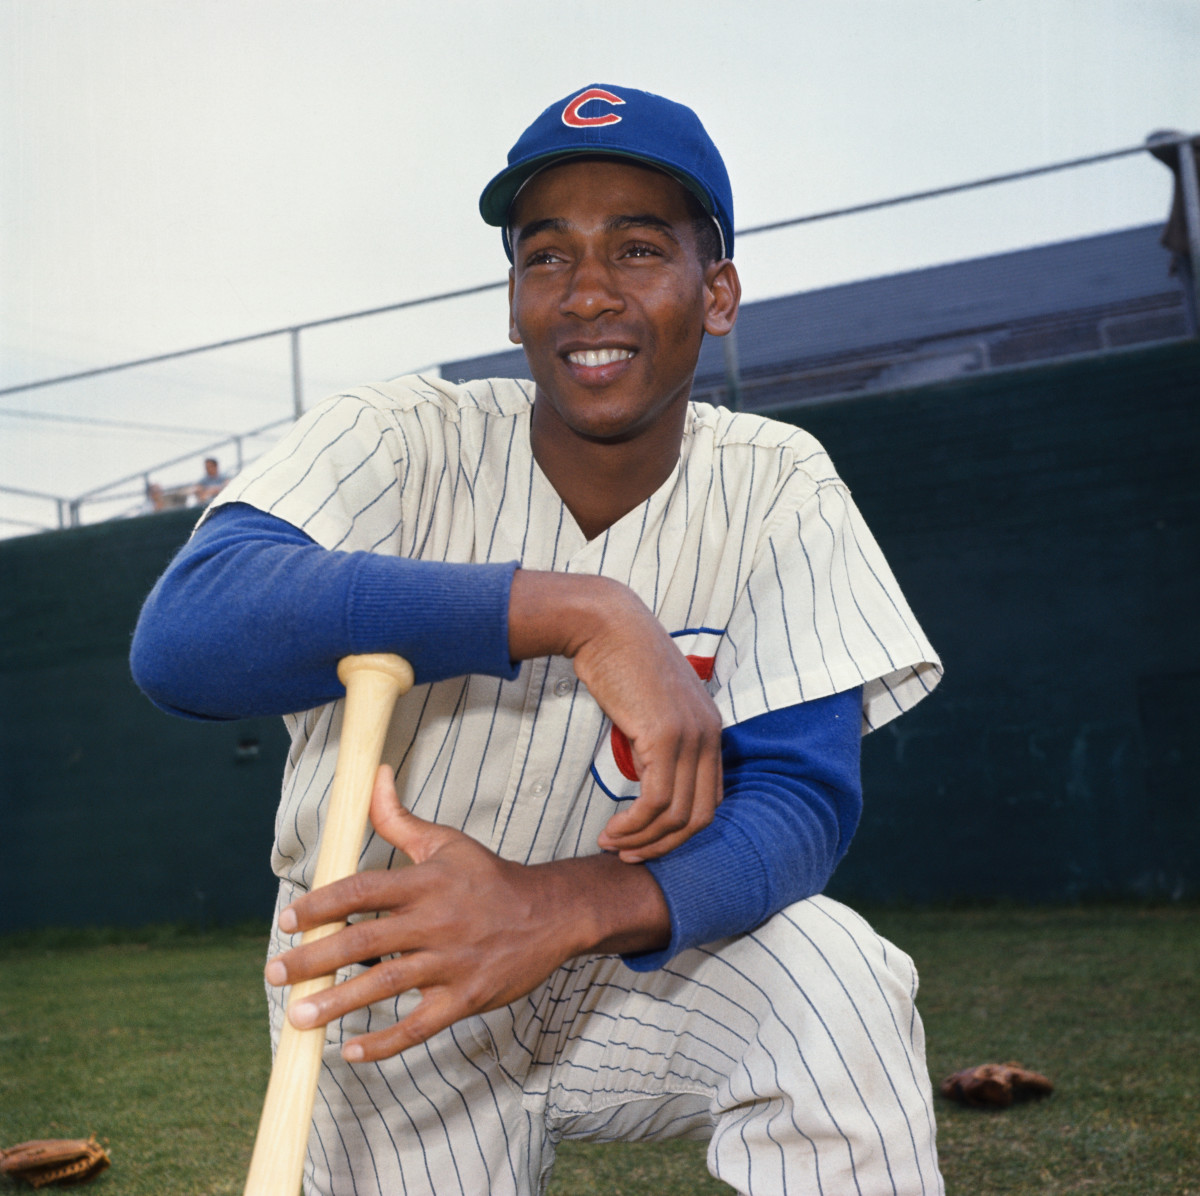 Ernie Banks at Spring Training in 1961. No one loved playing the game more than “Mr. Cub.”